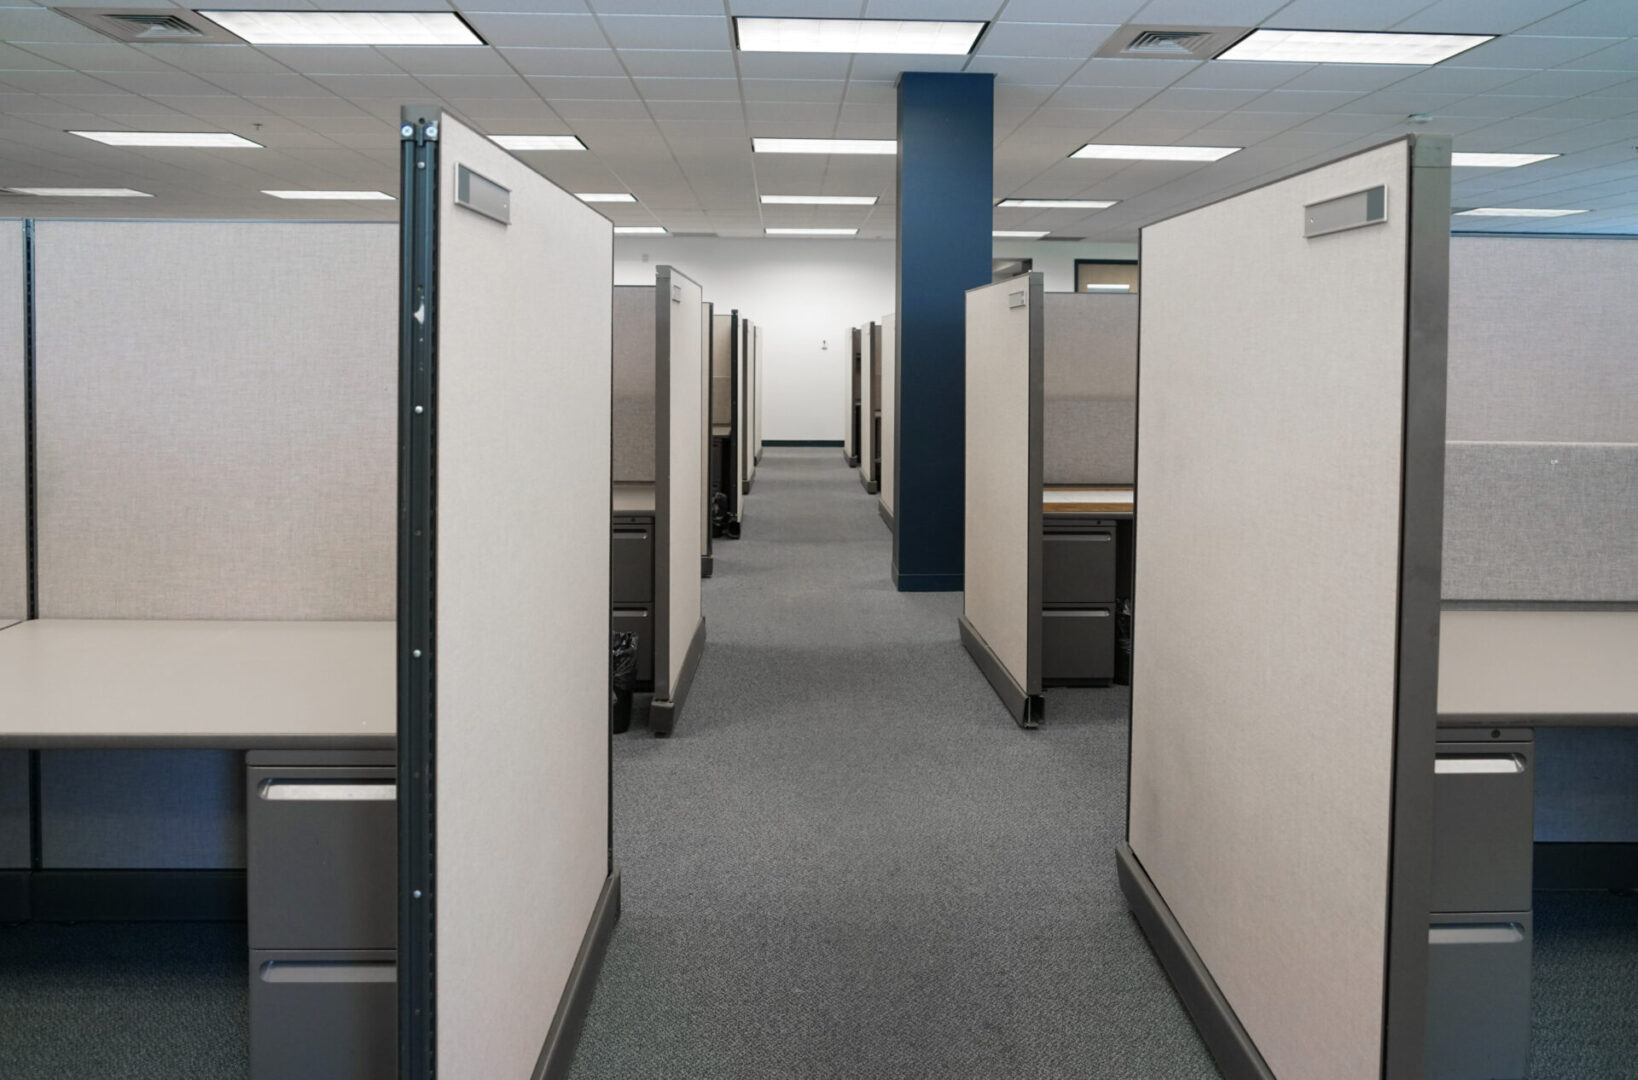 A row of cubicles in an office building.